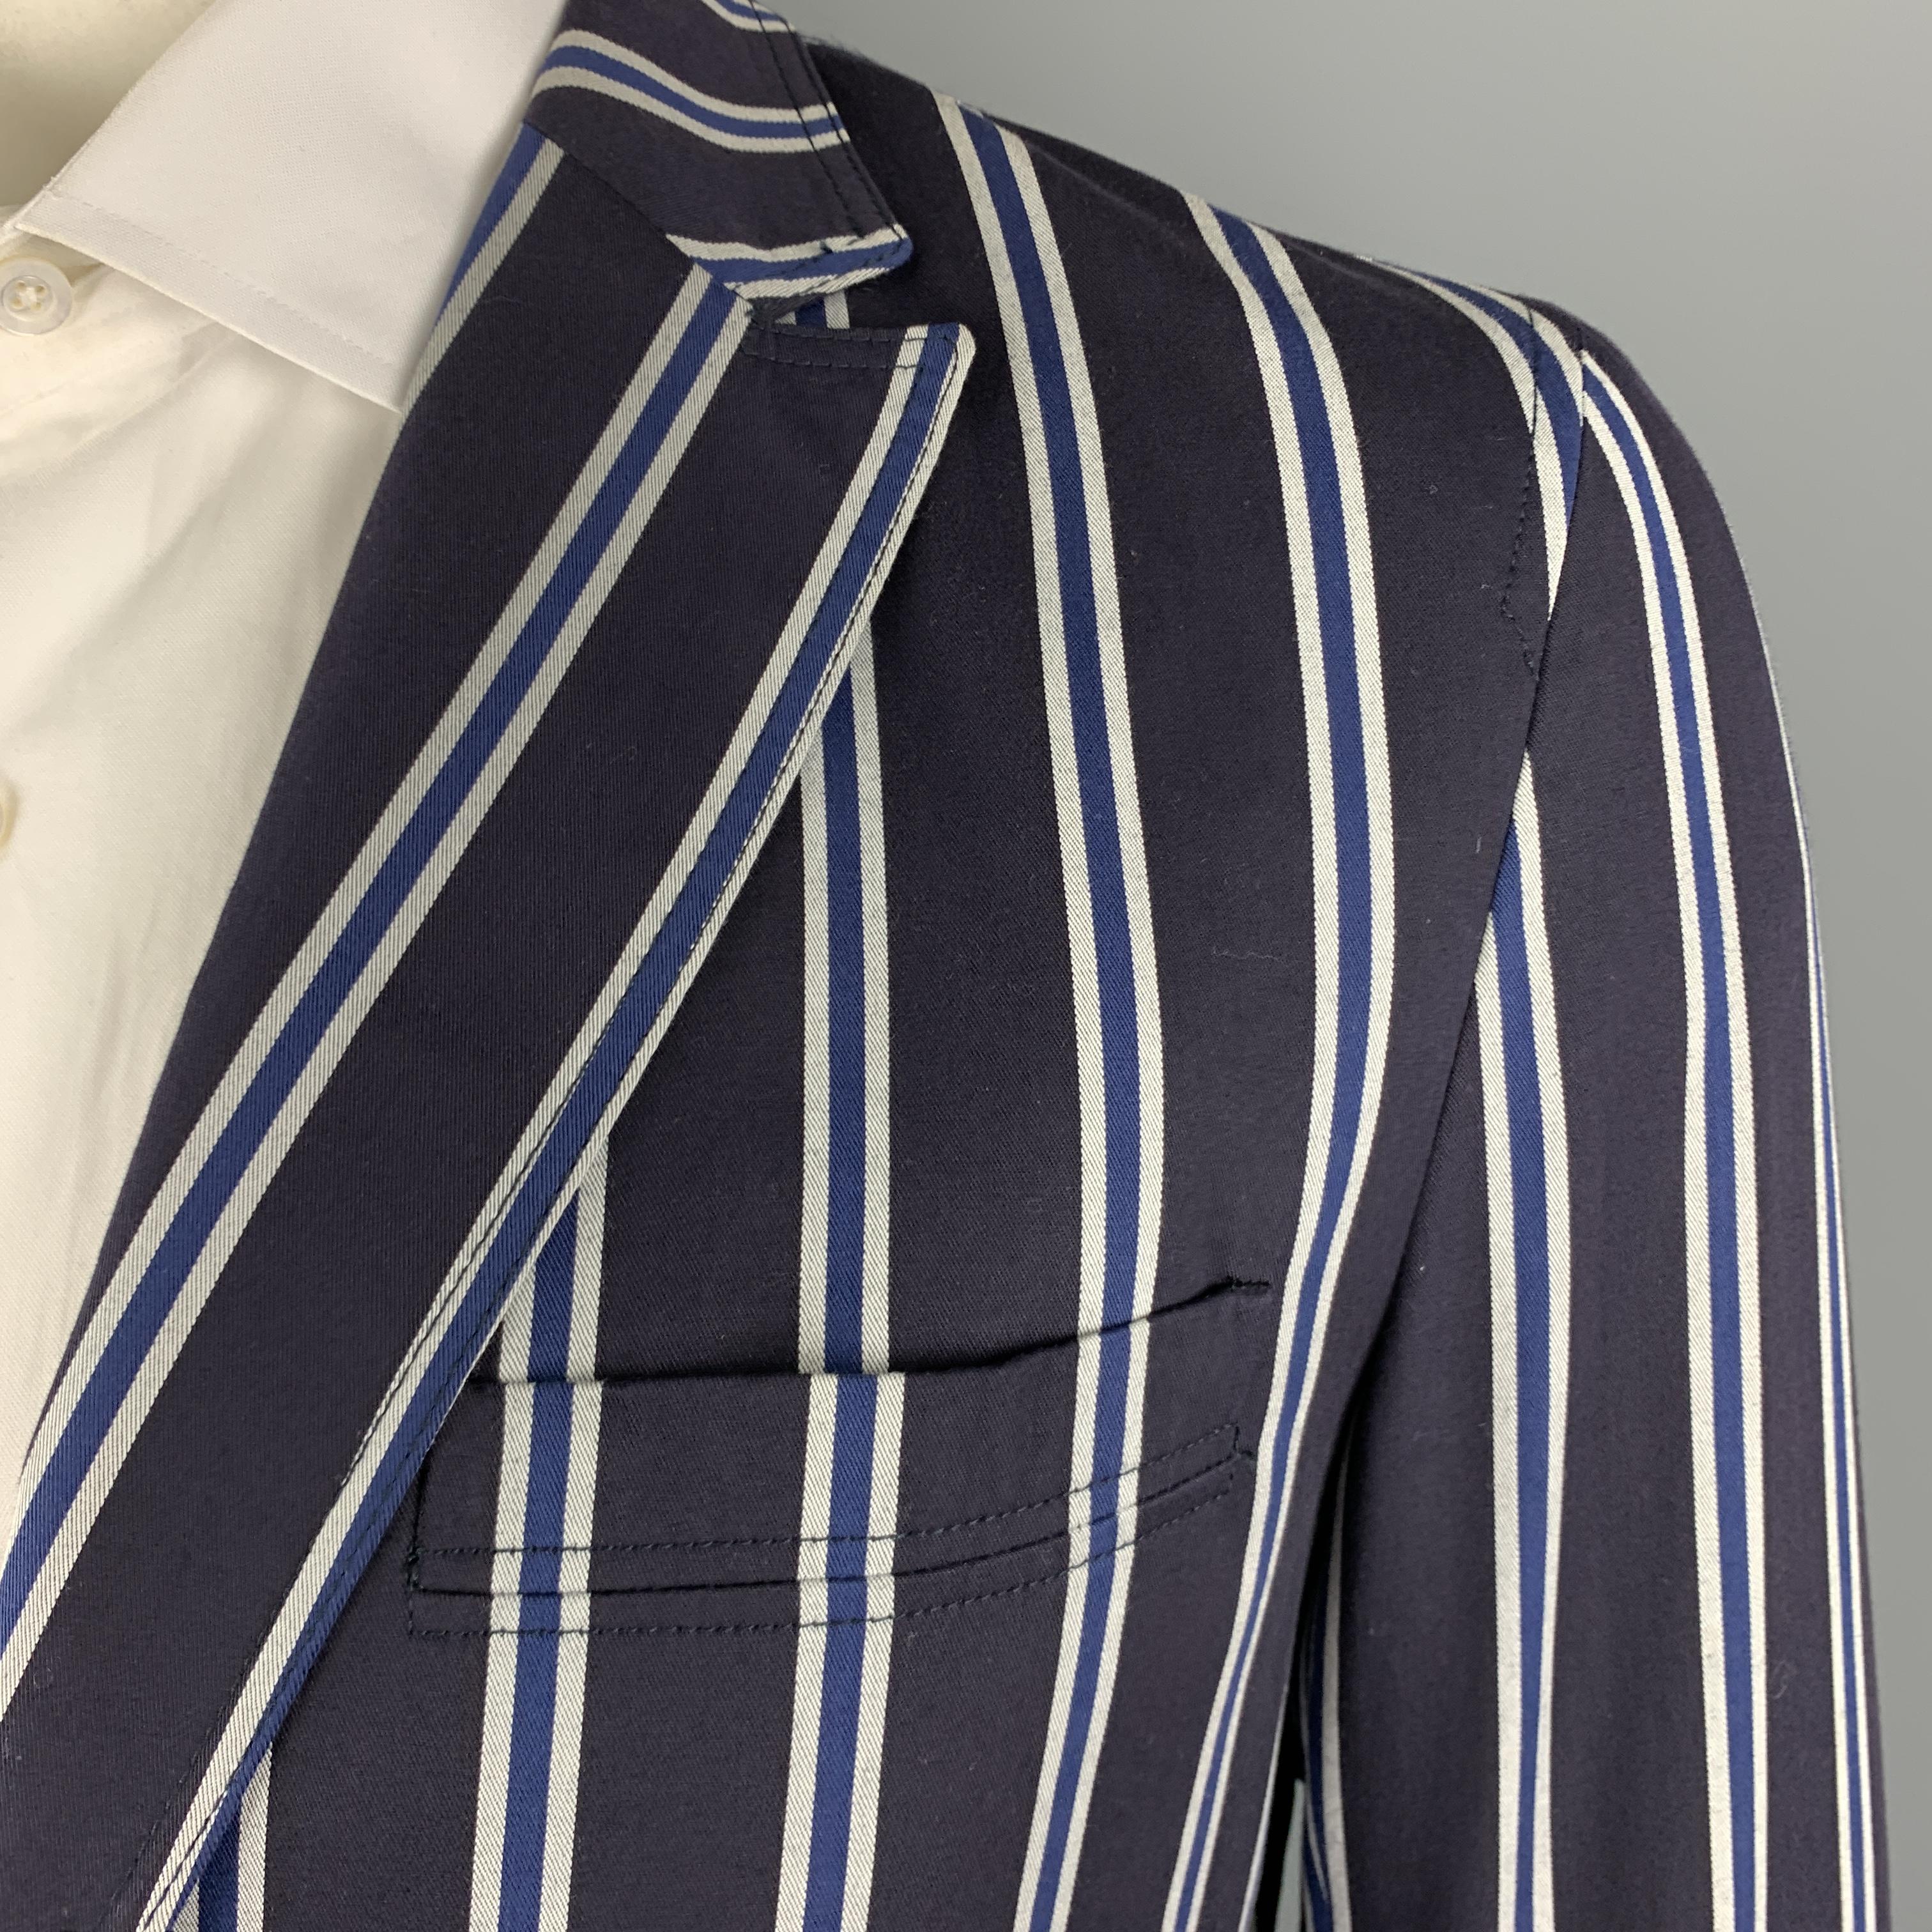 D&G sport coat comes in navy & gray striped twill with a peak lapel, single breasted, two button front, and flap pockets. Made in Italy.

Excellent Pre-Owned Condition.
Marked: IT 52

Measurements:

Shoulder: 18 in.
Chest: 44 in.
Sleeve: 27